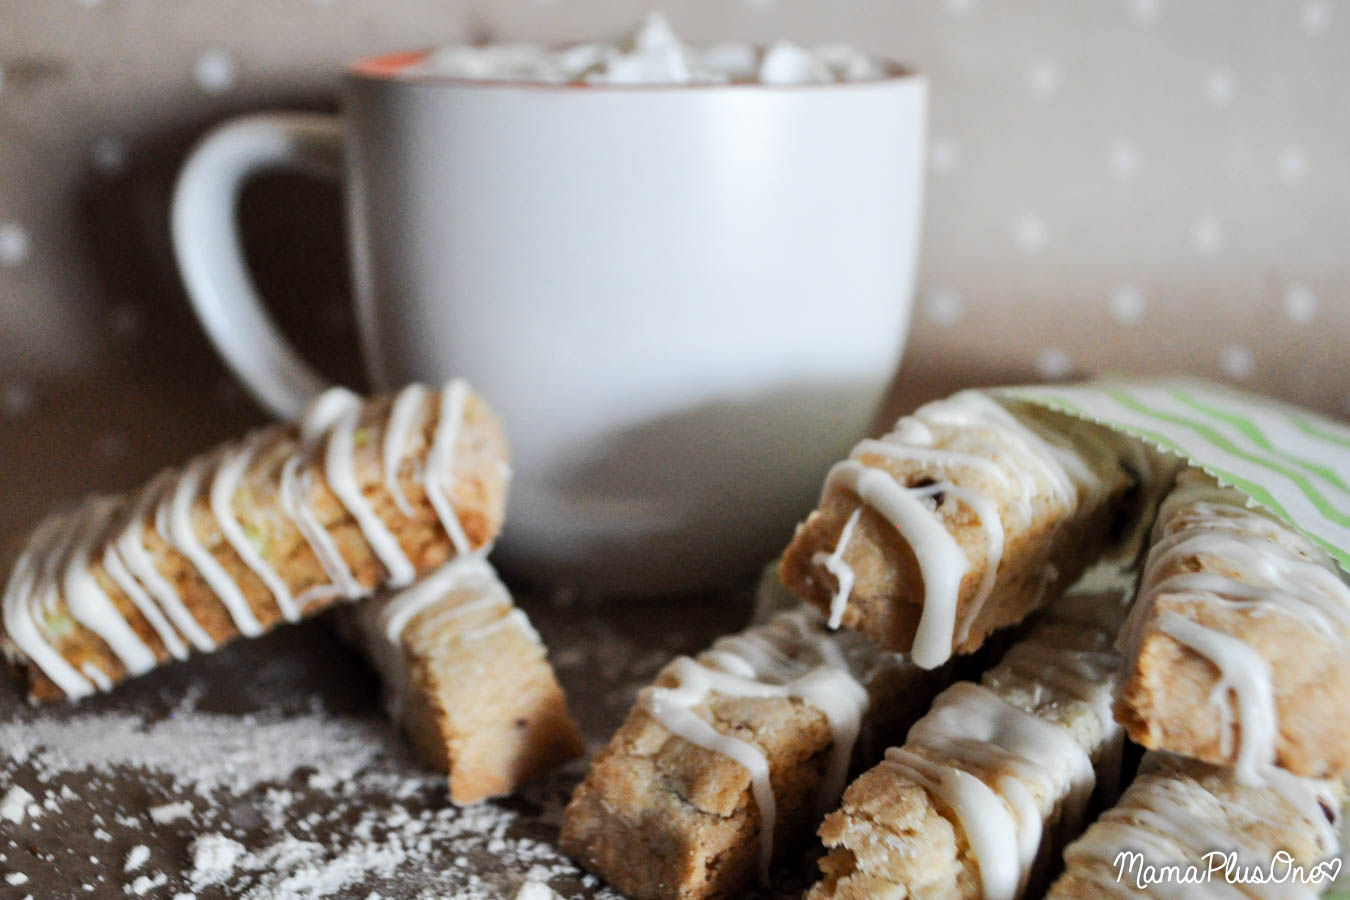 Choose Your Own Holiday Adventure With Mix-and-Match Biscotti